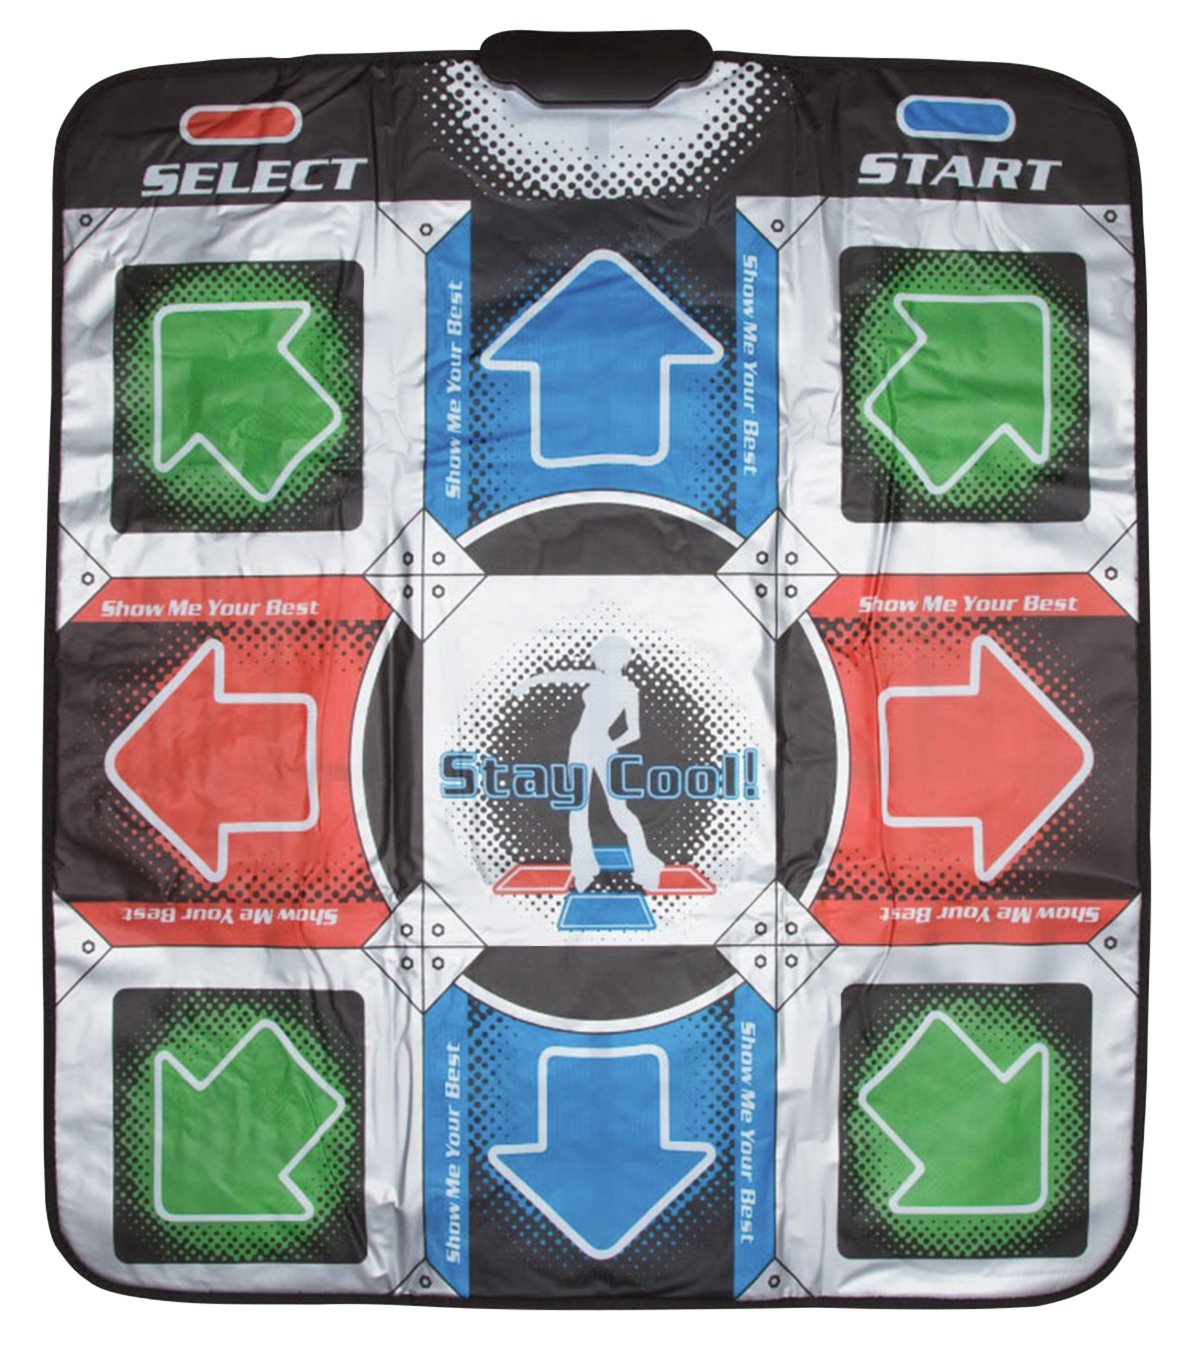 Plug and Play Retro Gaming Dance Mat with inbuilt Songs Review